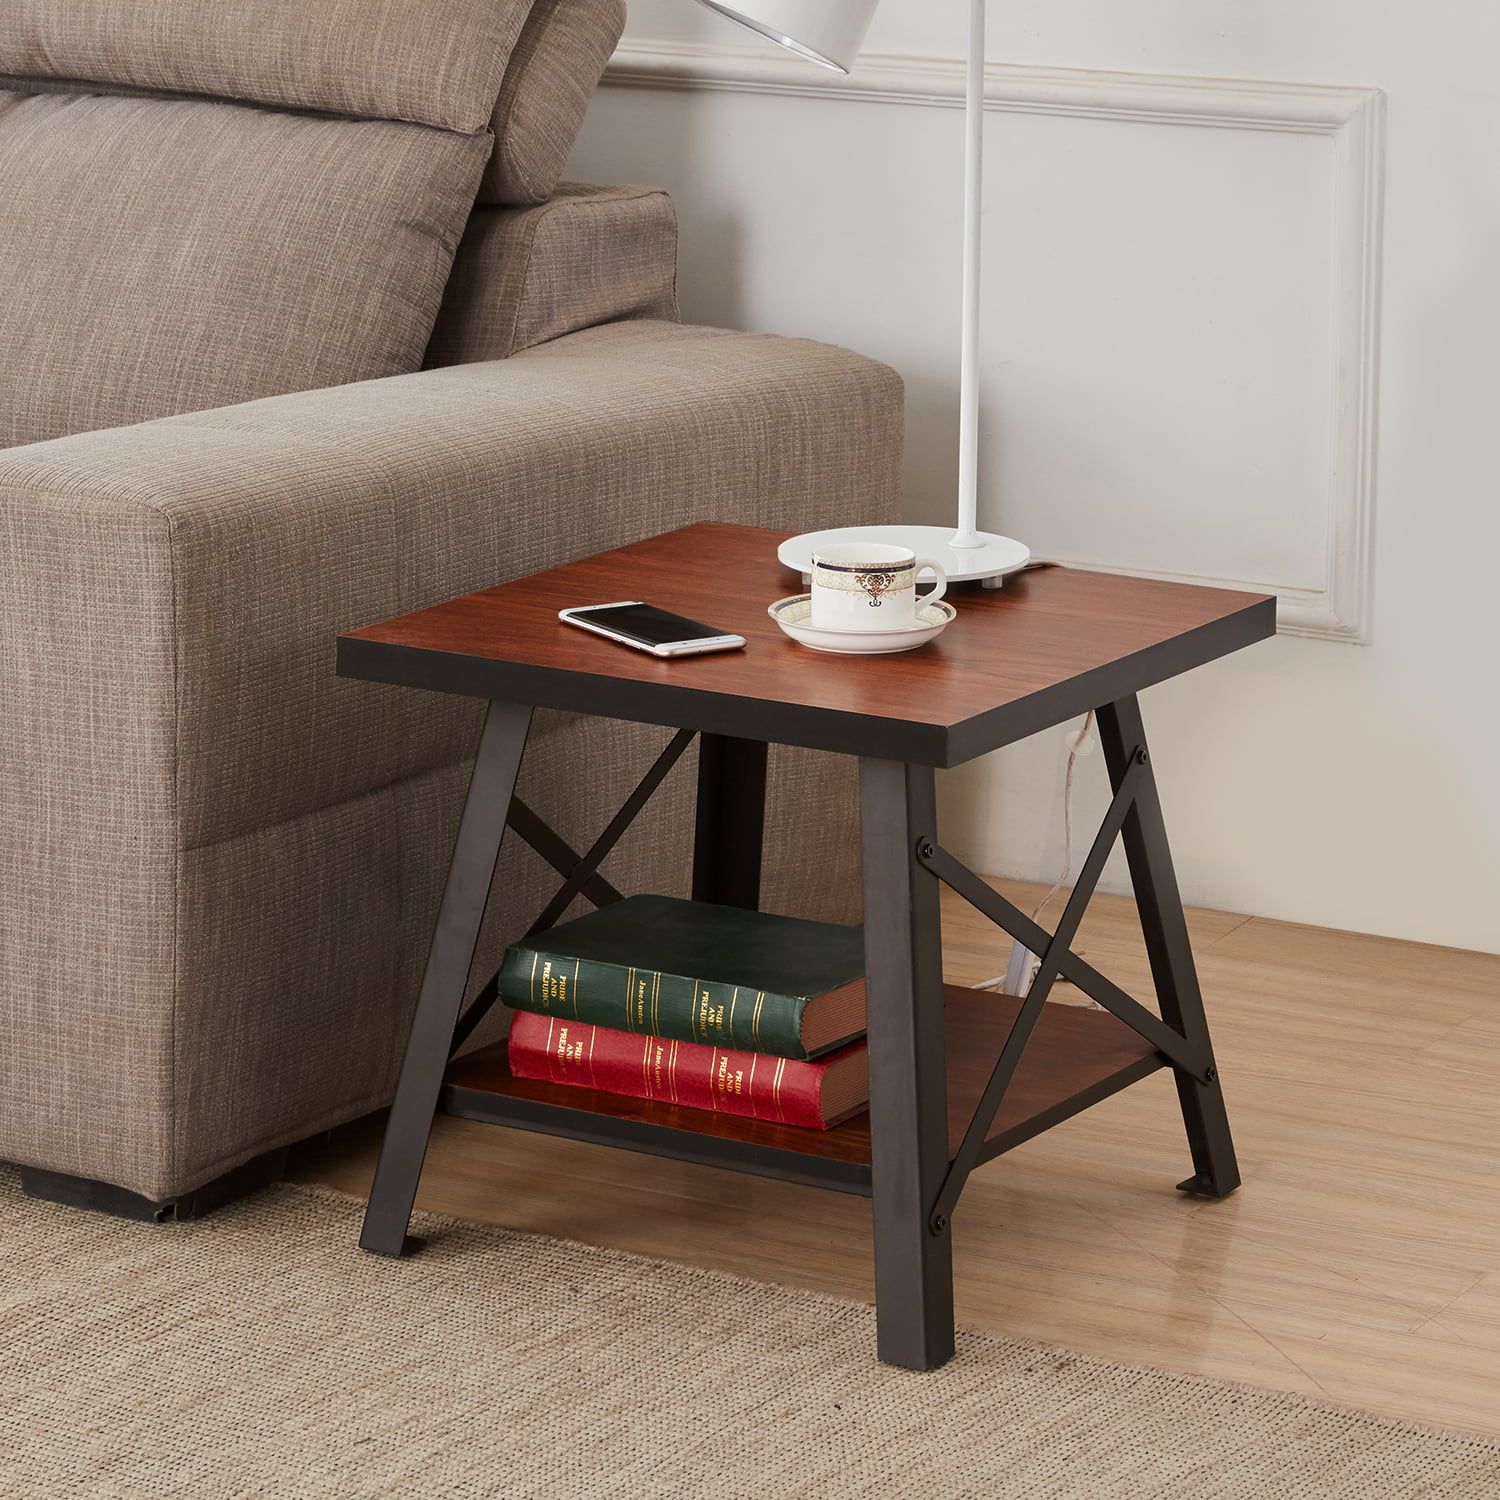 20" Open Storage Shelf Coffee Table End Table Square,industrial Style With Regard To Coffee Tables With Open Storage Shelves (View 4 of 20)